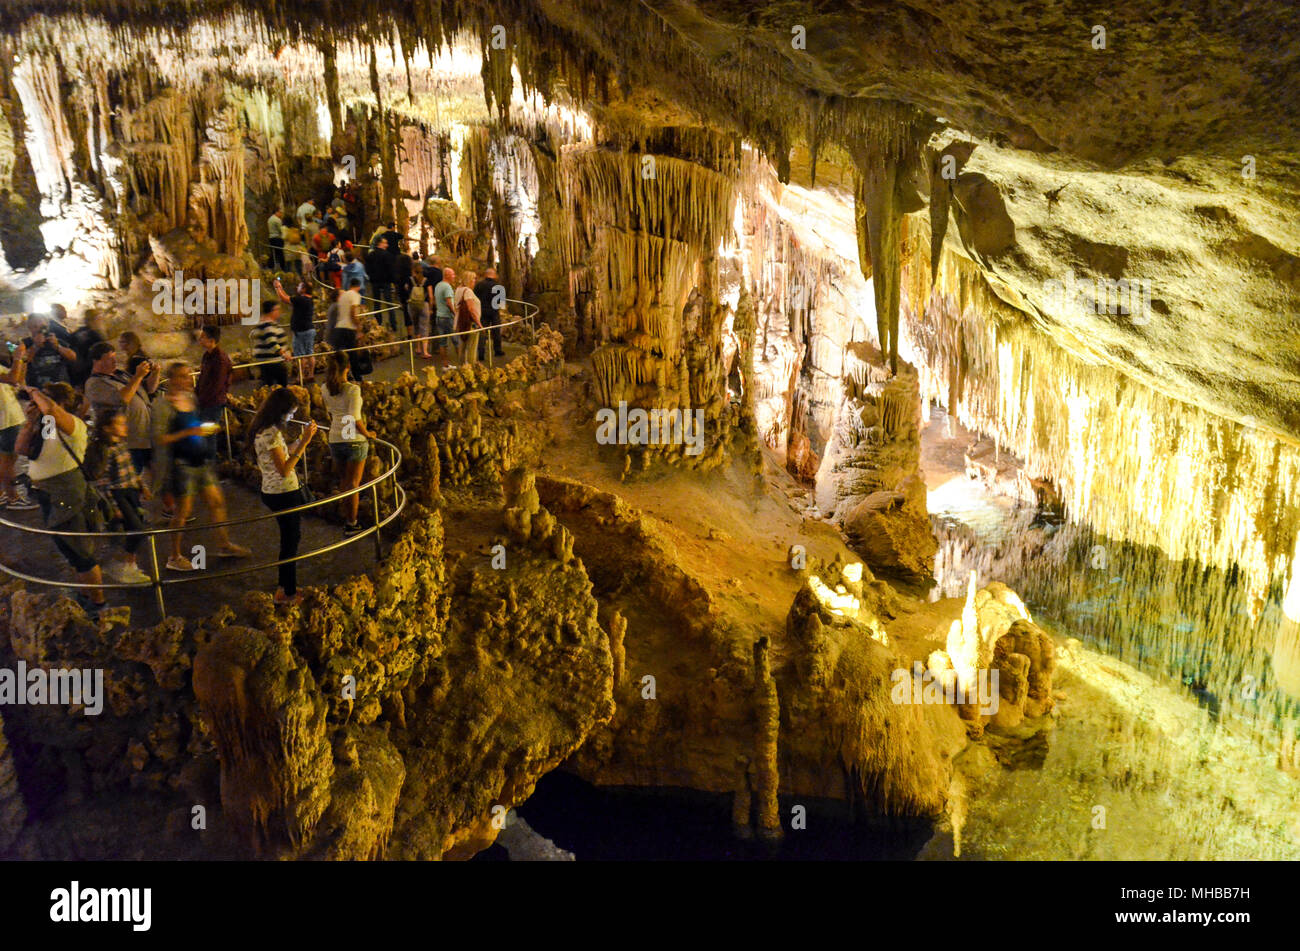 Underground experience at the Drach caves, Mallorca, Spain Stock Photo